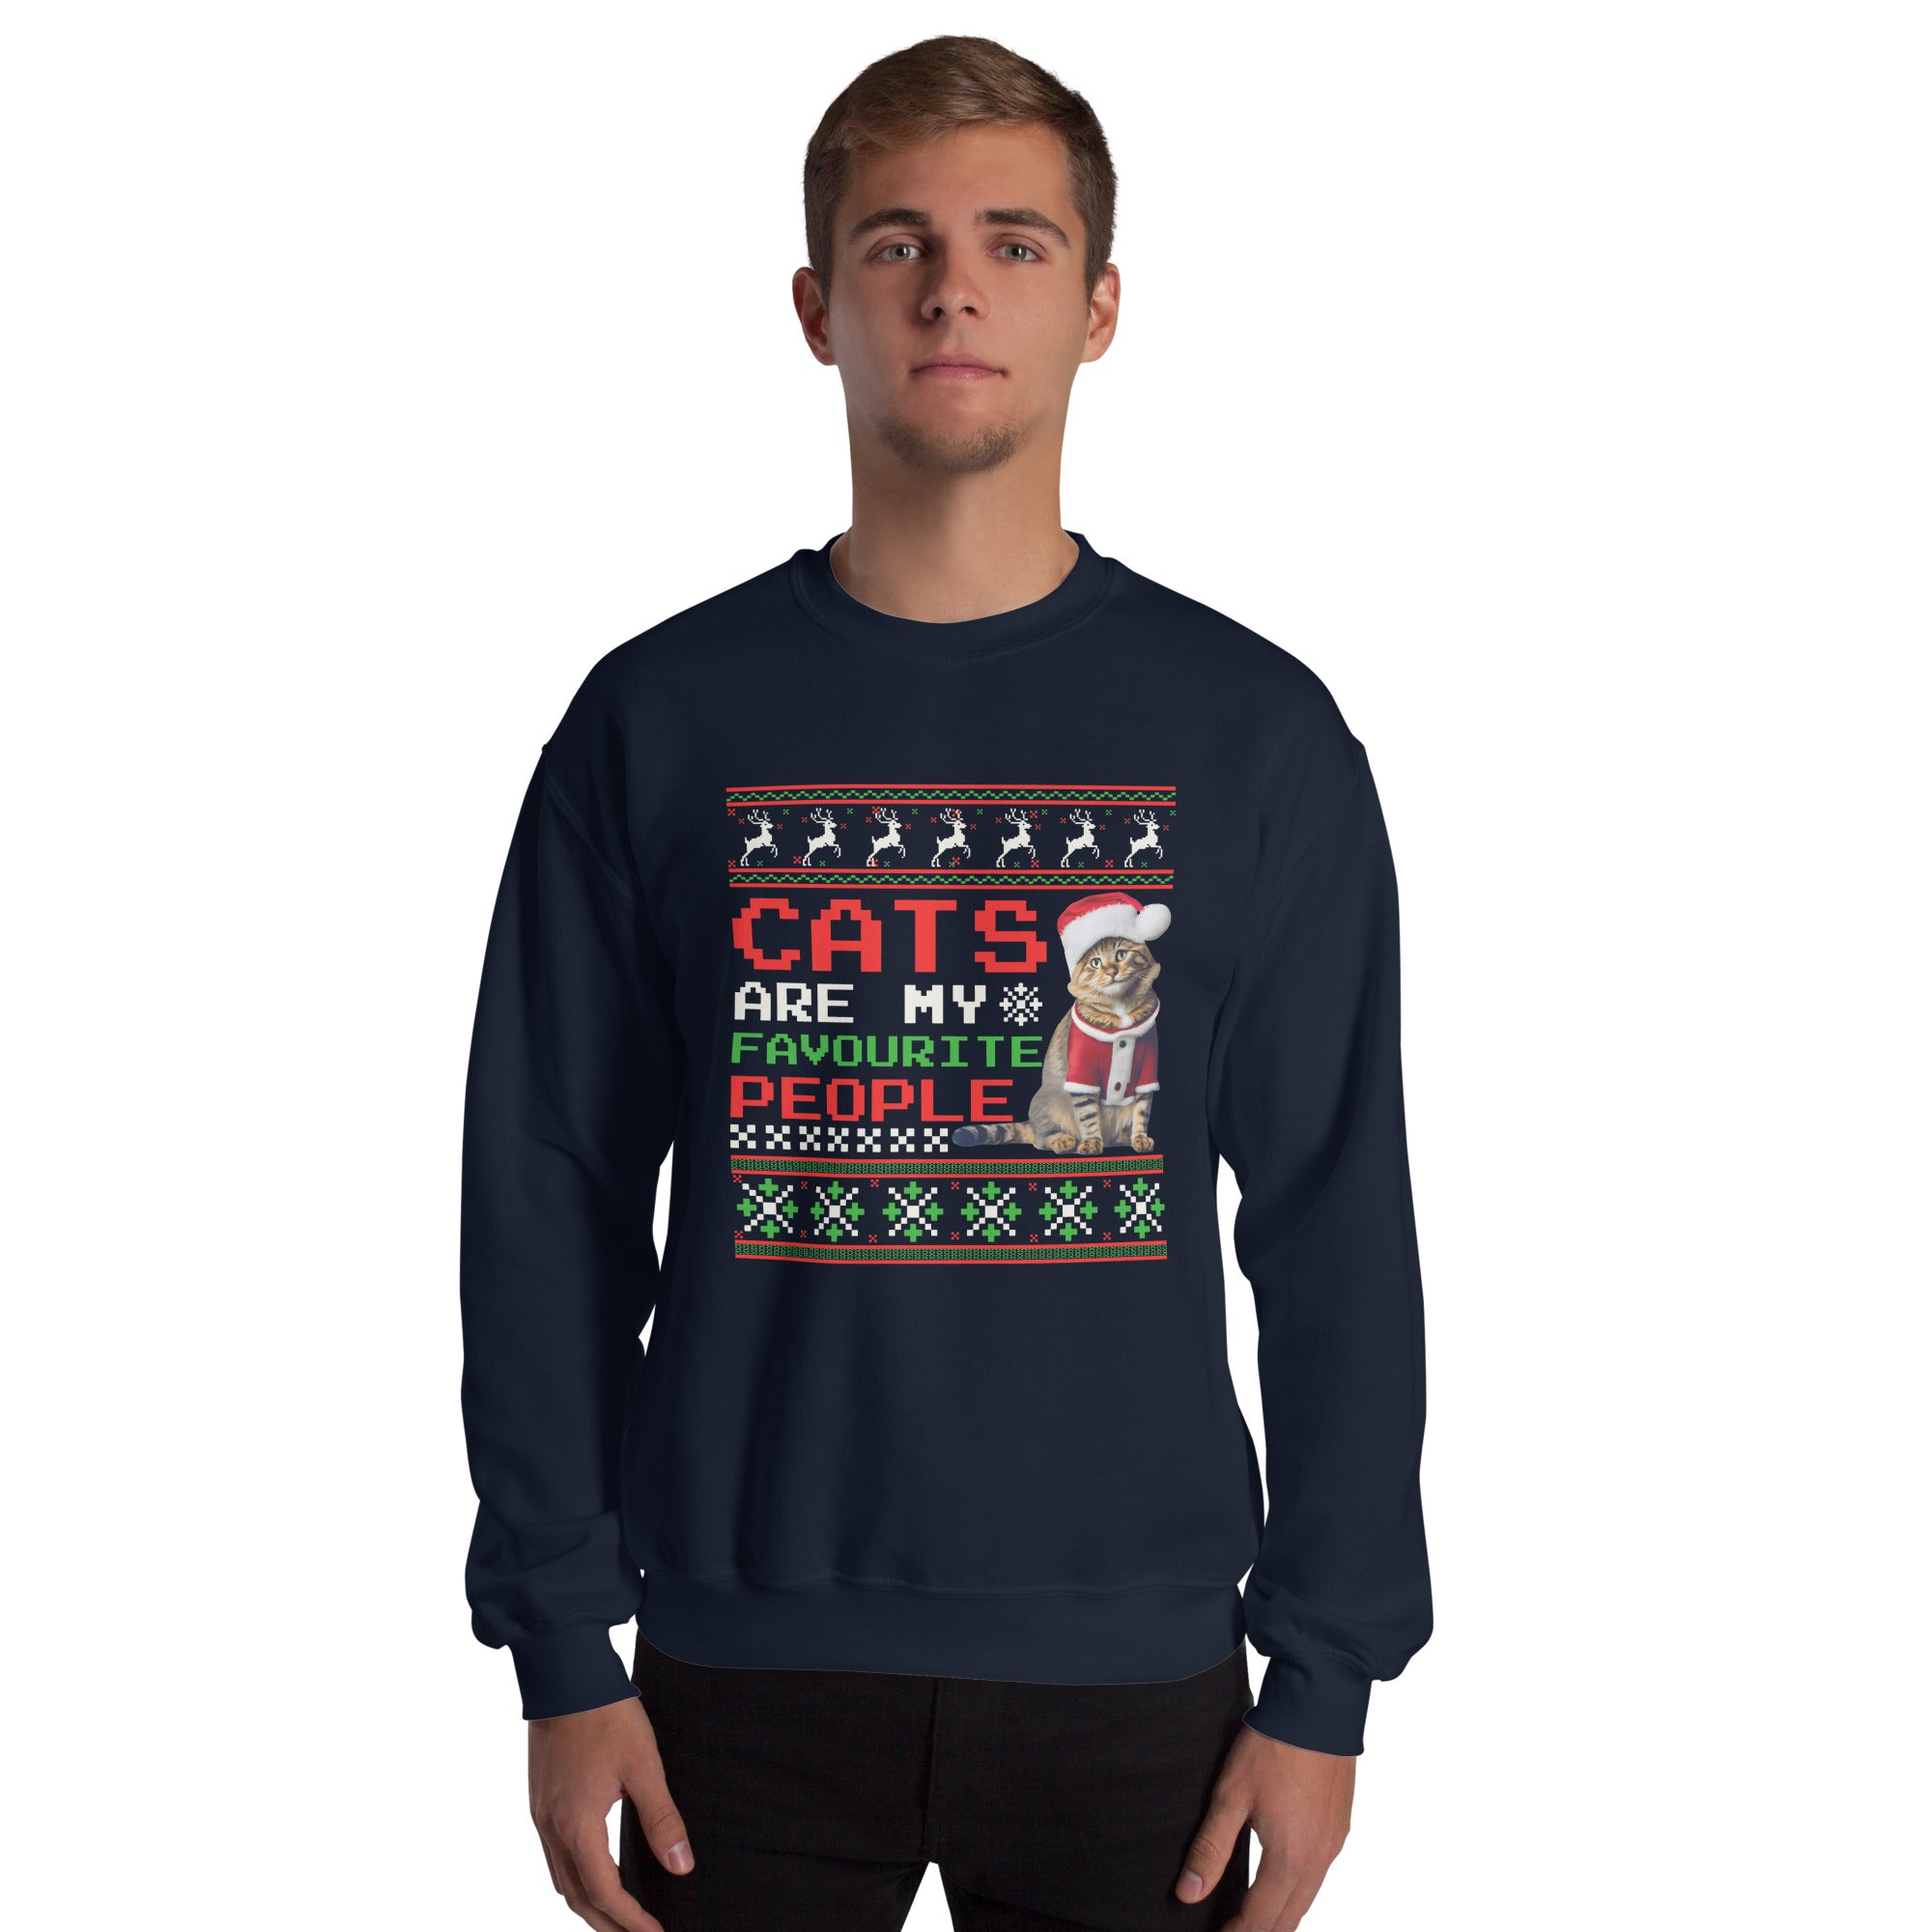 Cats Are My Favourite People Men's Sweatshirt Maine Coon Christmas Cat Santa Claus Costume Holiday Animals Ugly Xmas Men's Jumper